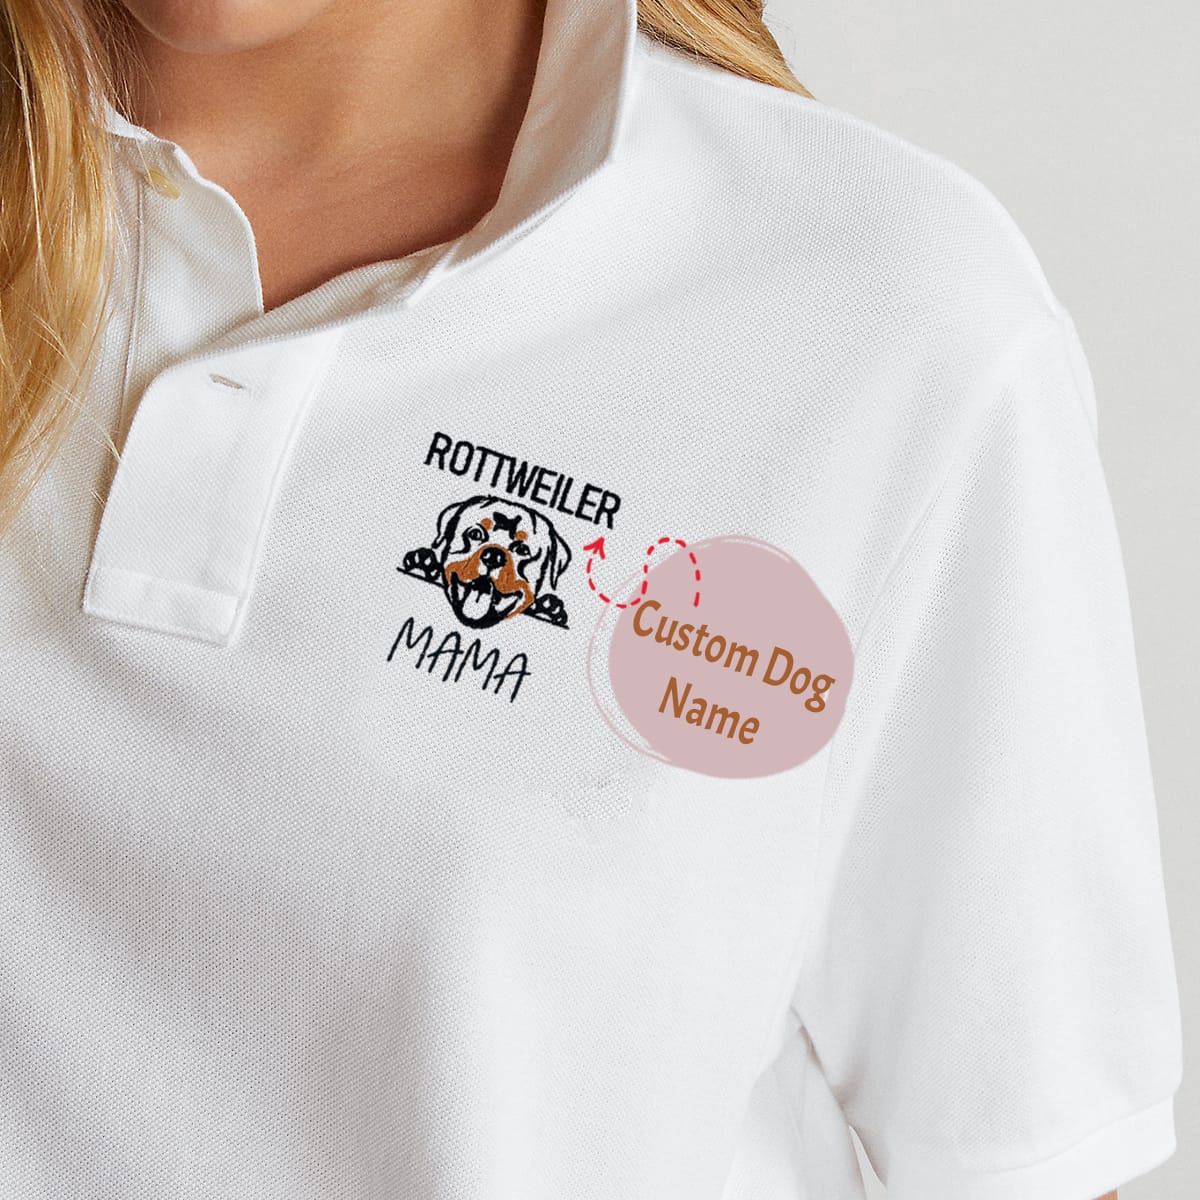 Personalized Rottweiler Dog Mama Polo Shirt Embroidered with Dog Name, Best Gifts For Rottweiler Lovers